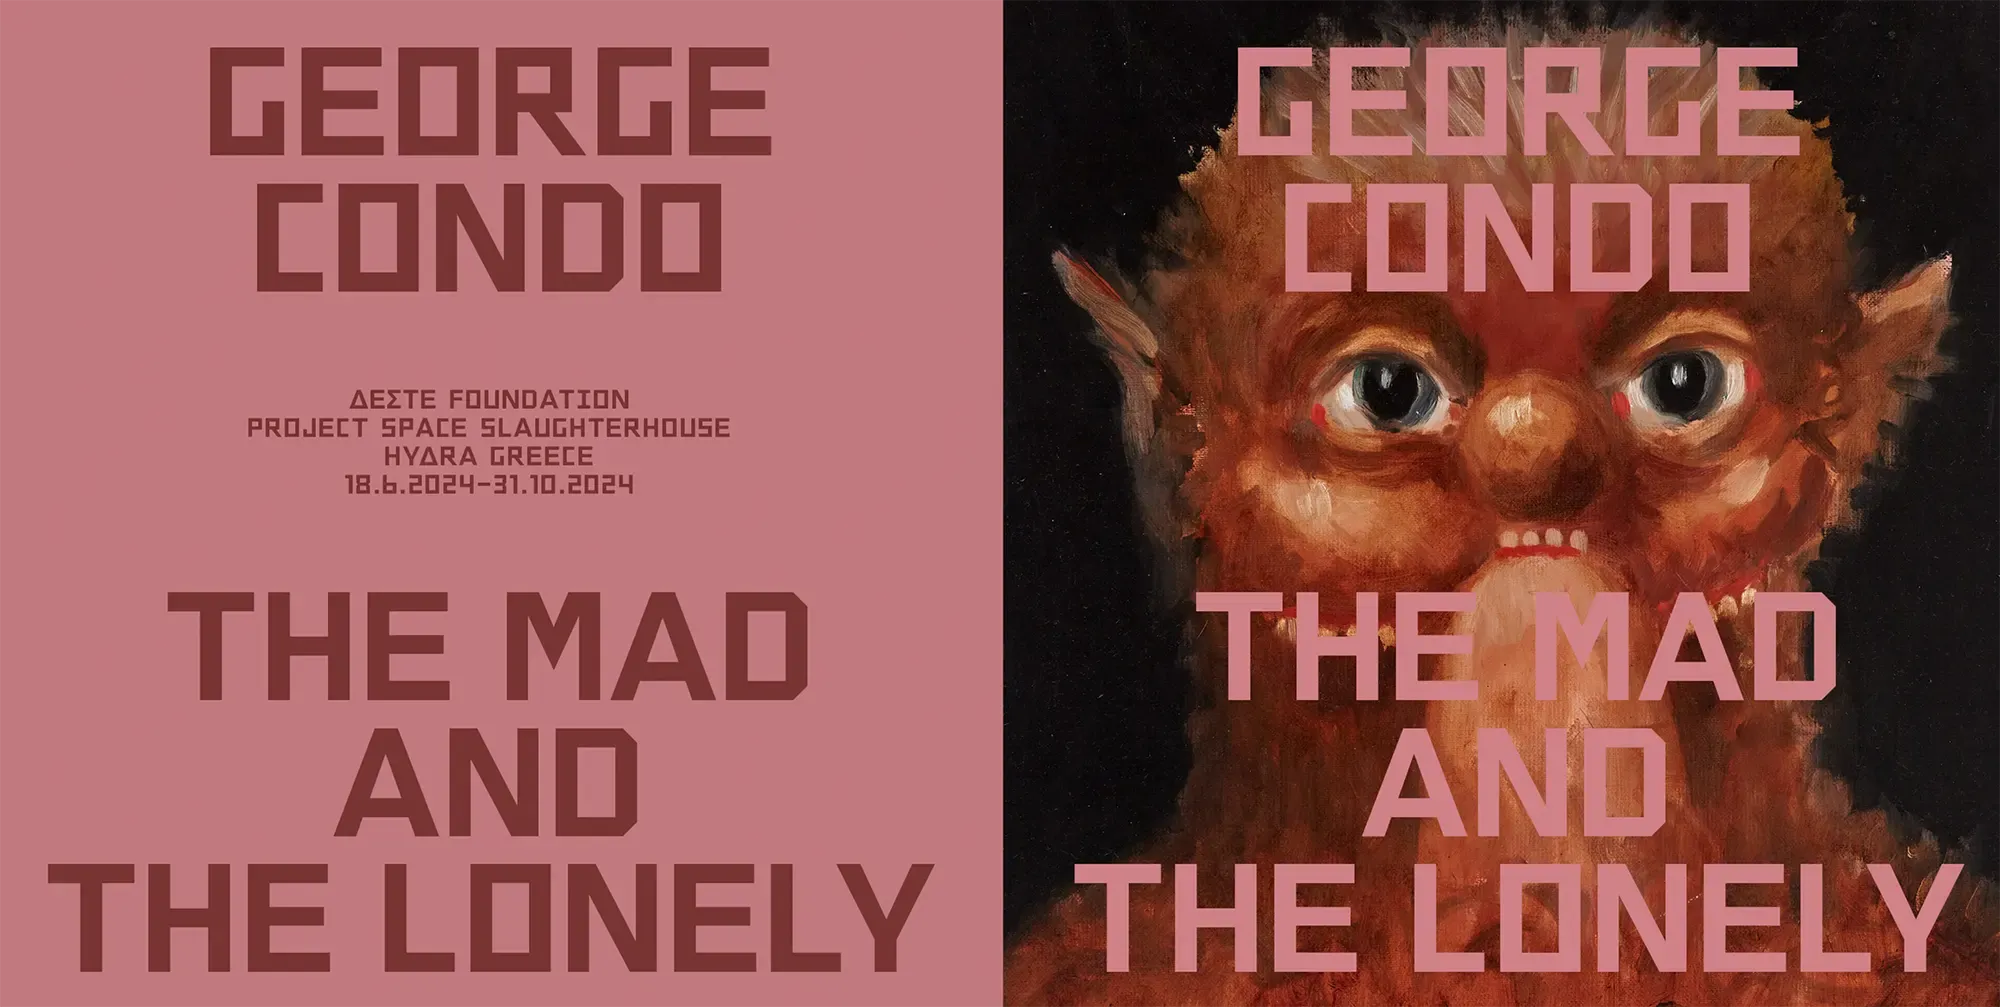 george condo 2024 contemporary art at deste foundation hydra greece the mad and the lonely